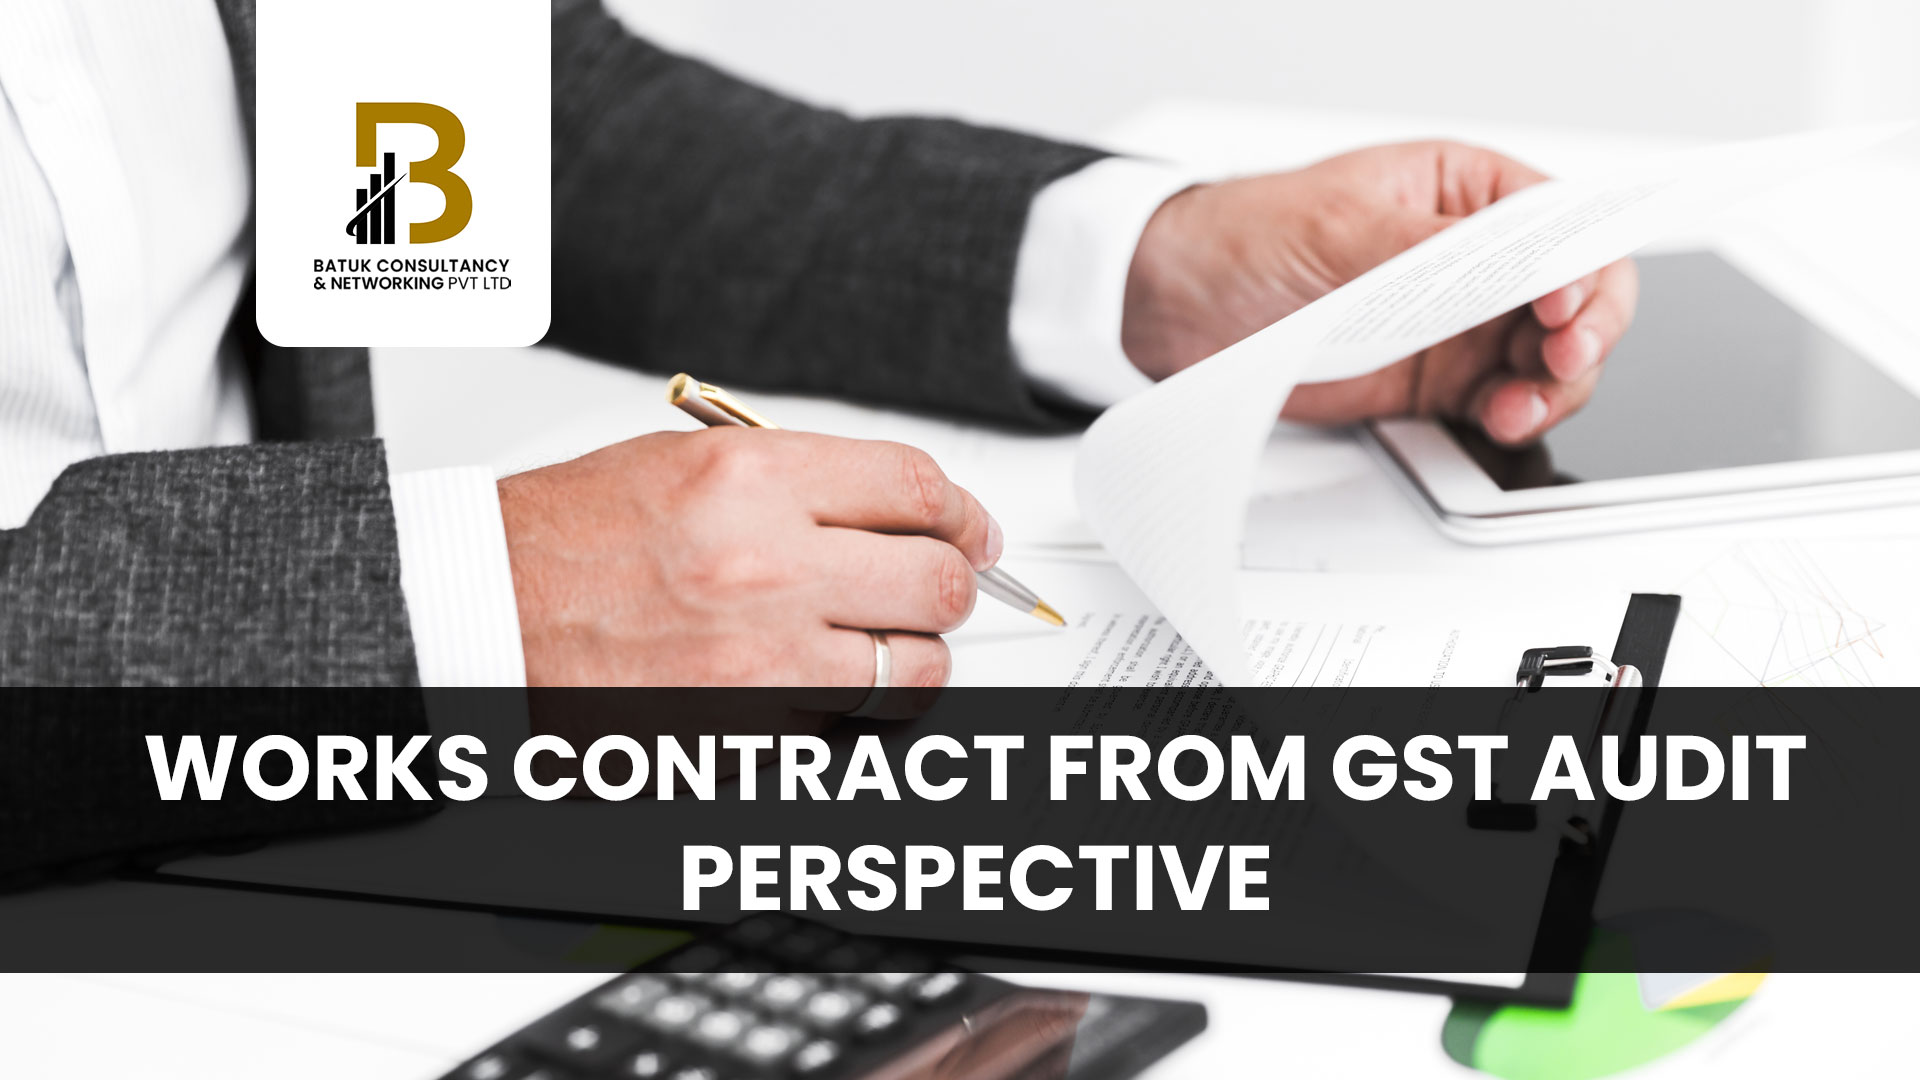 Works Contract From GST Audit Perspective